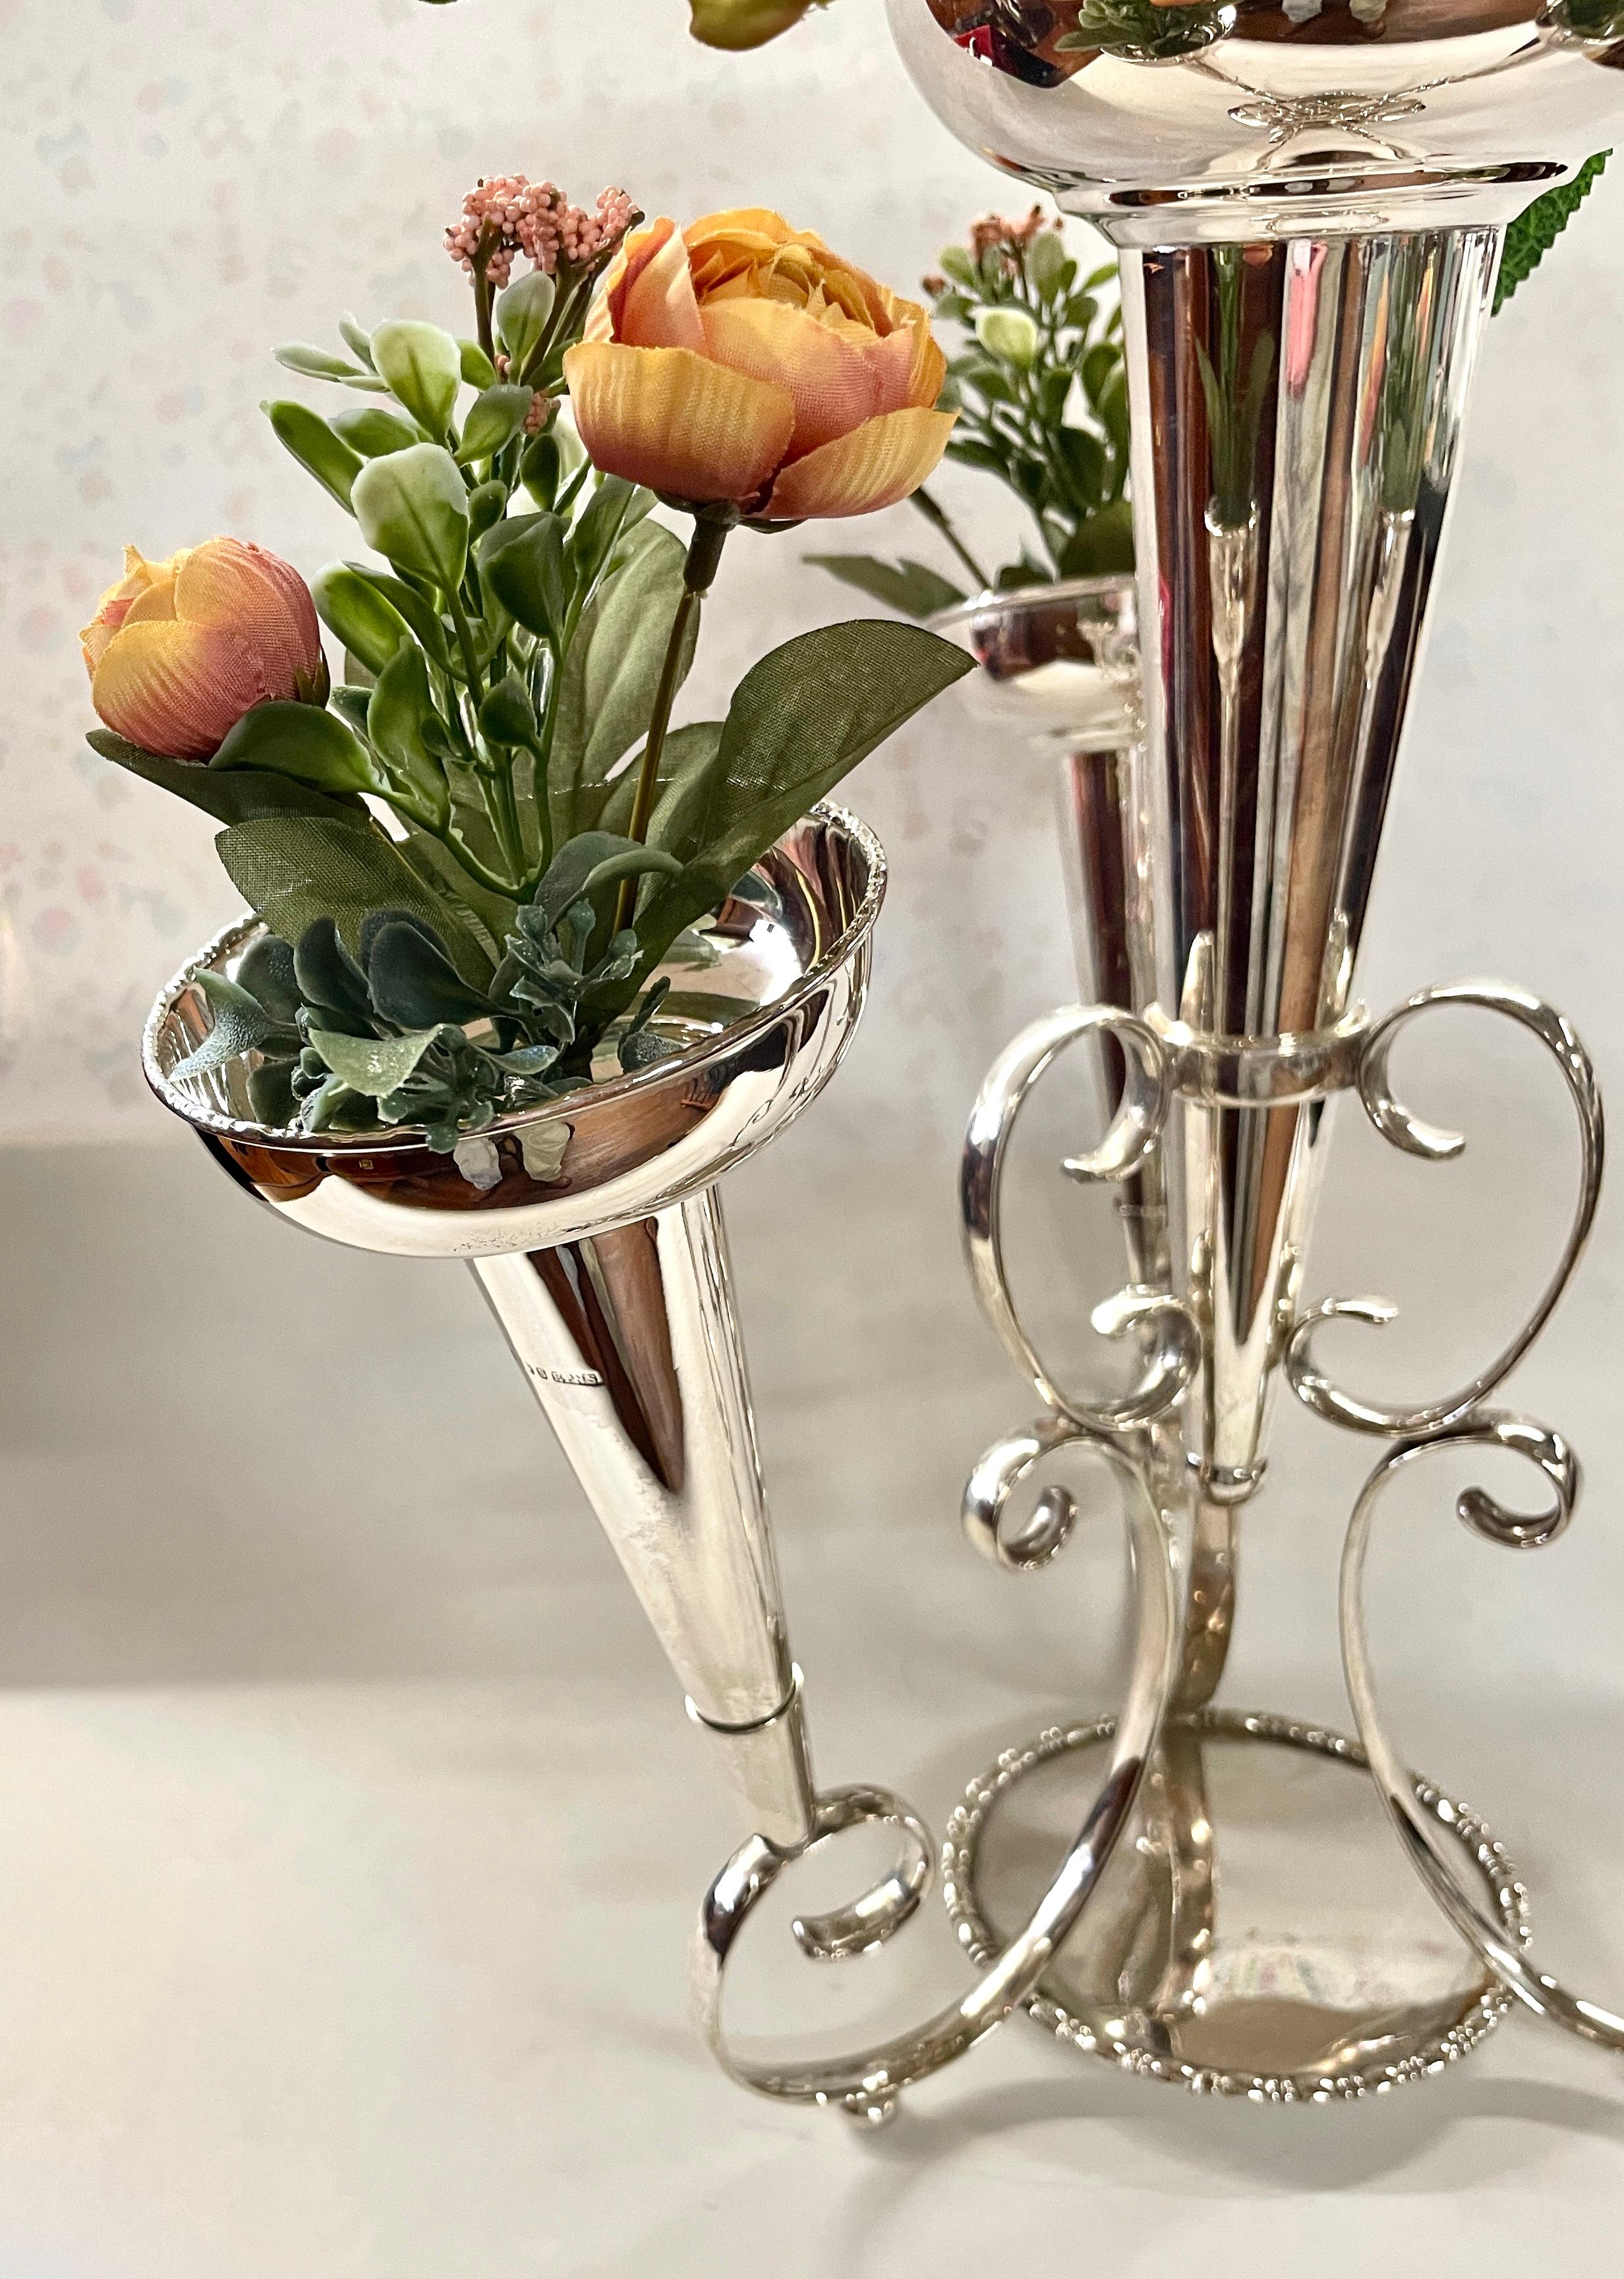 Superb Antique English Sheffield Silver Plate 4-Tube Floral Epergne Centerpiece For Sale 3